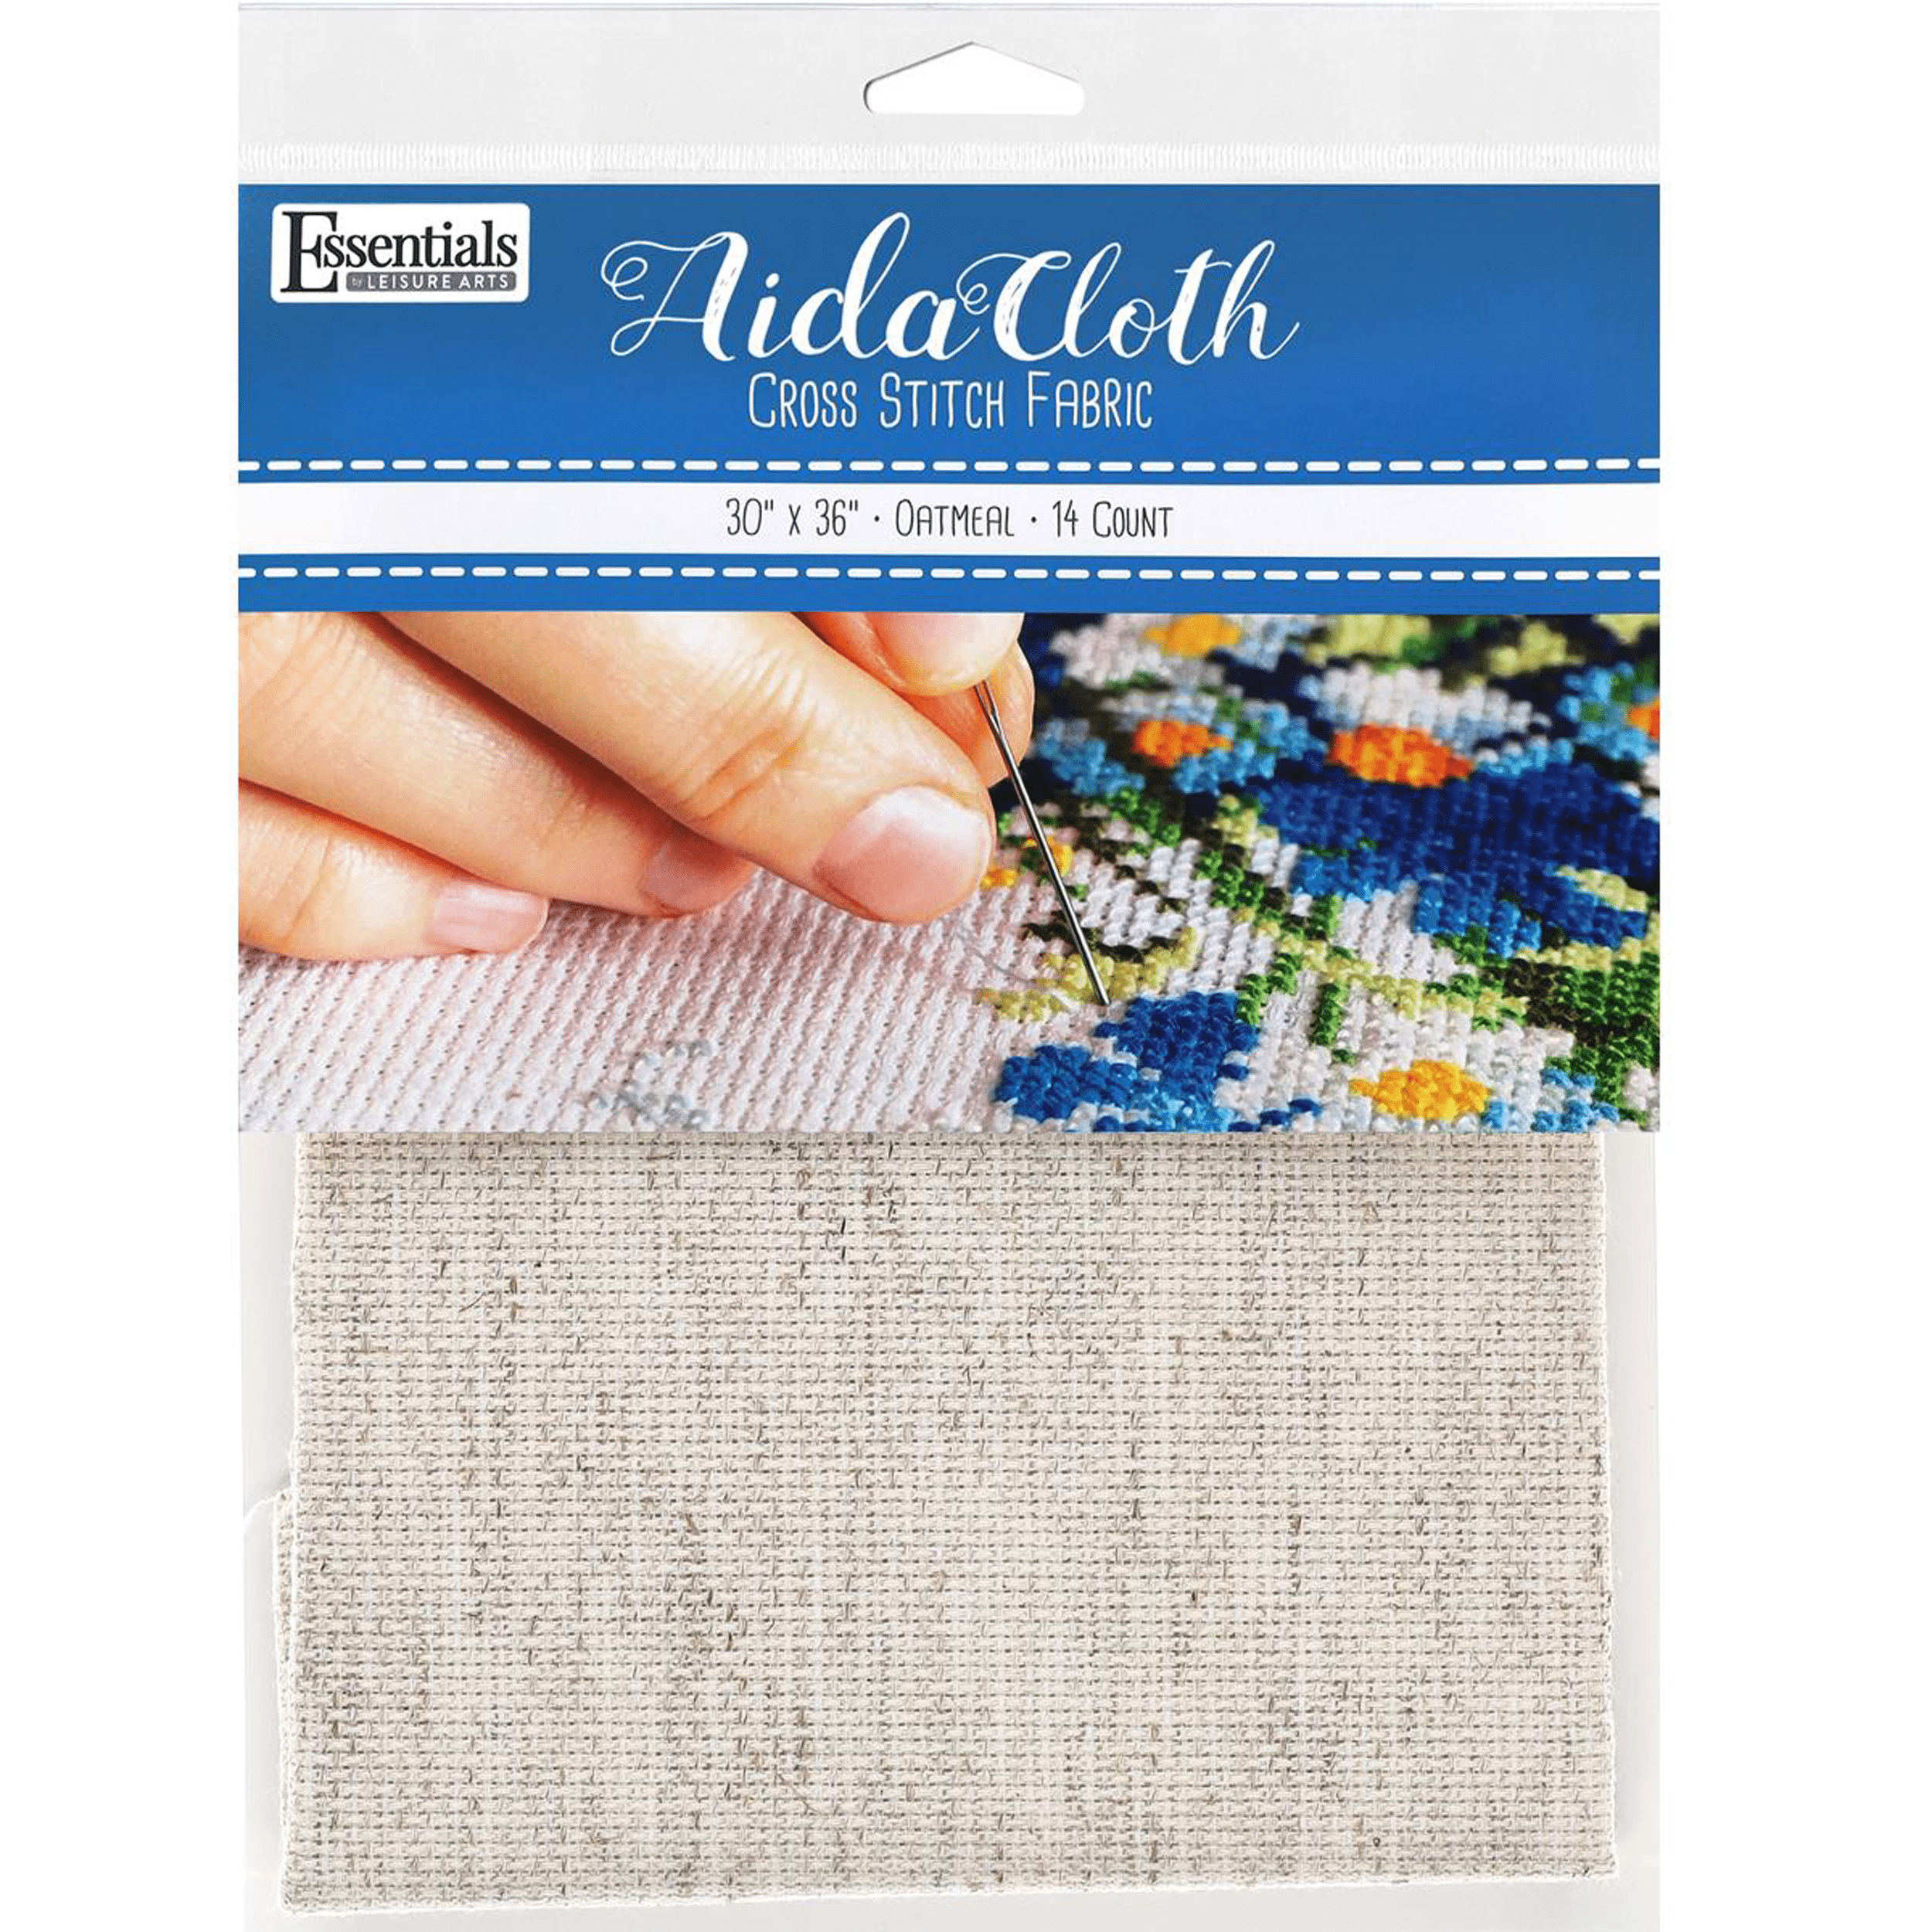 Essentials By Leisure Arts Aida Cloth, 18 count, 15 x 18, Antique White cross  stitch fabric for embroidery, cross stitch, machine embroidery and  needlepoint